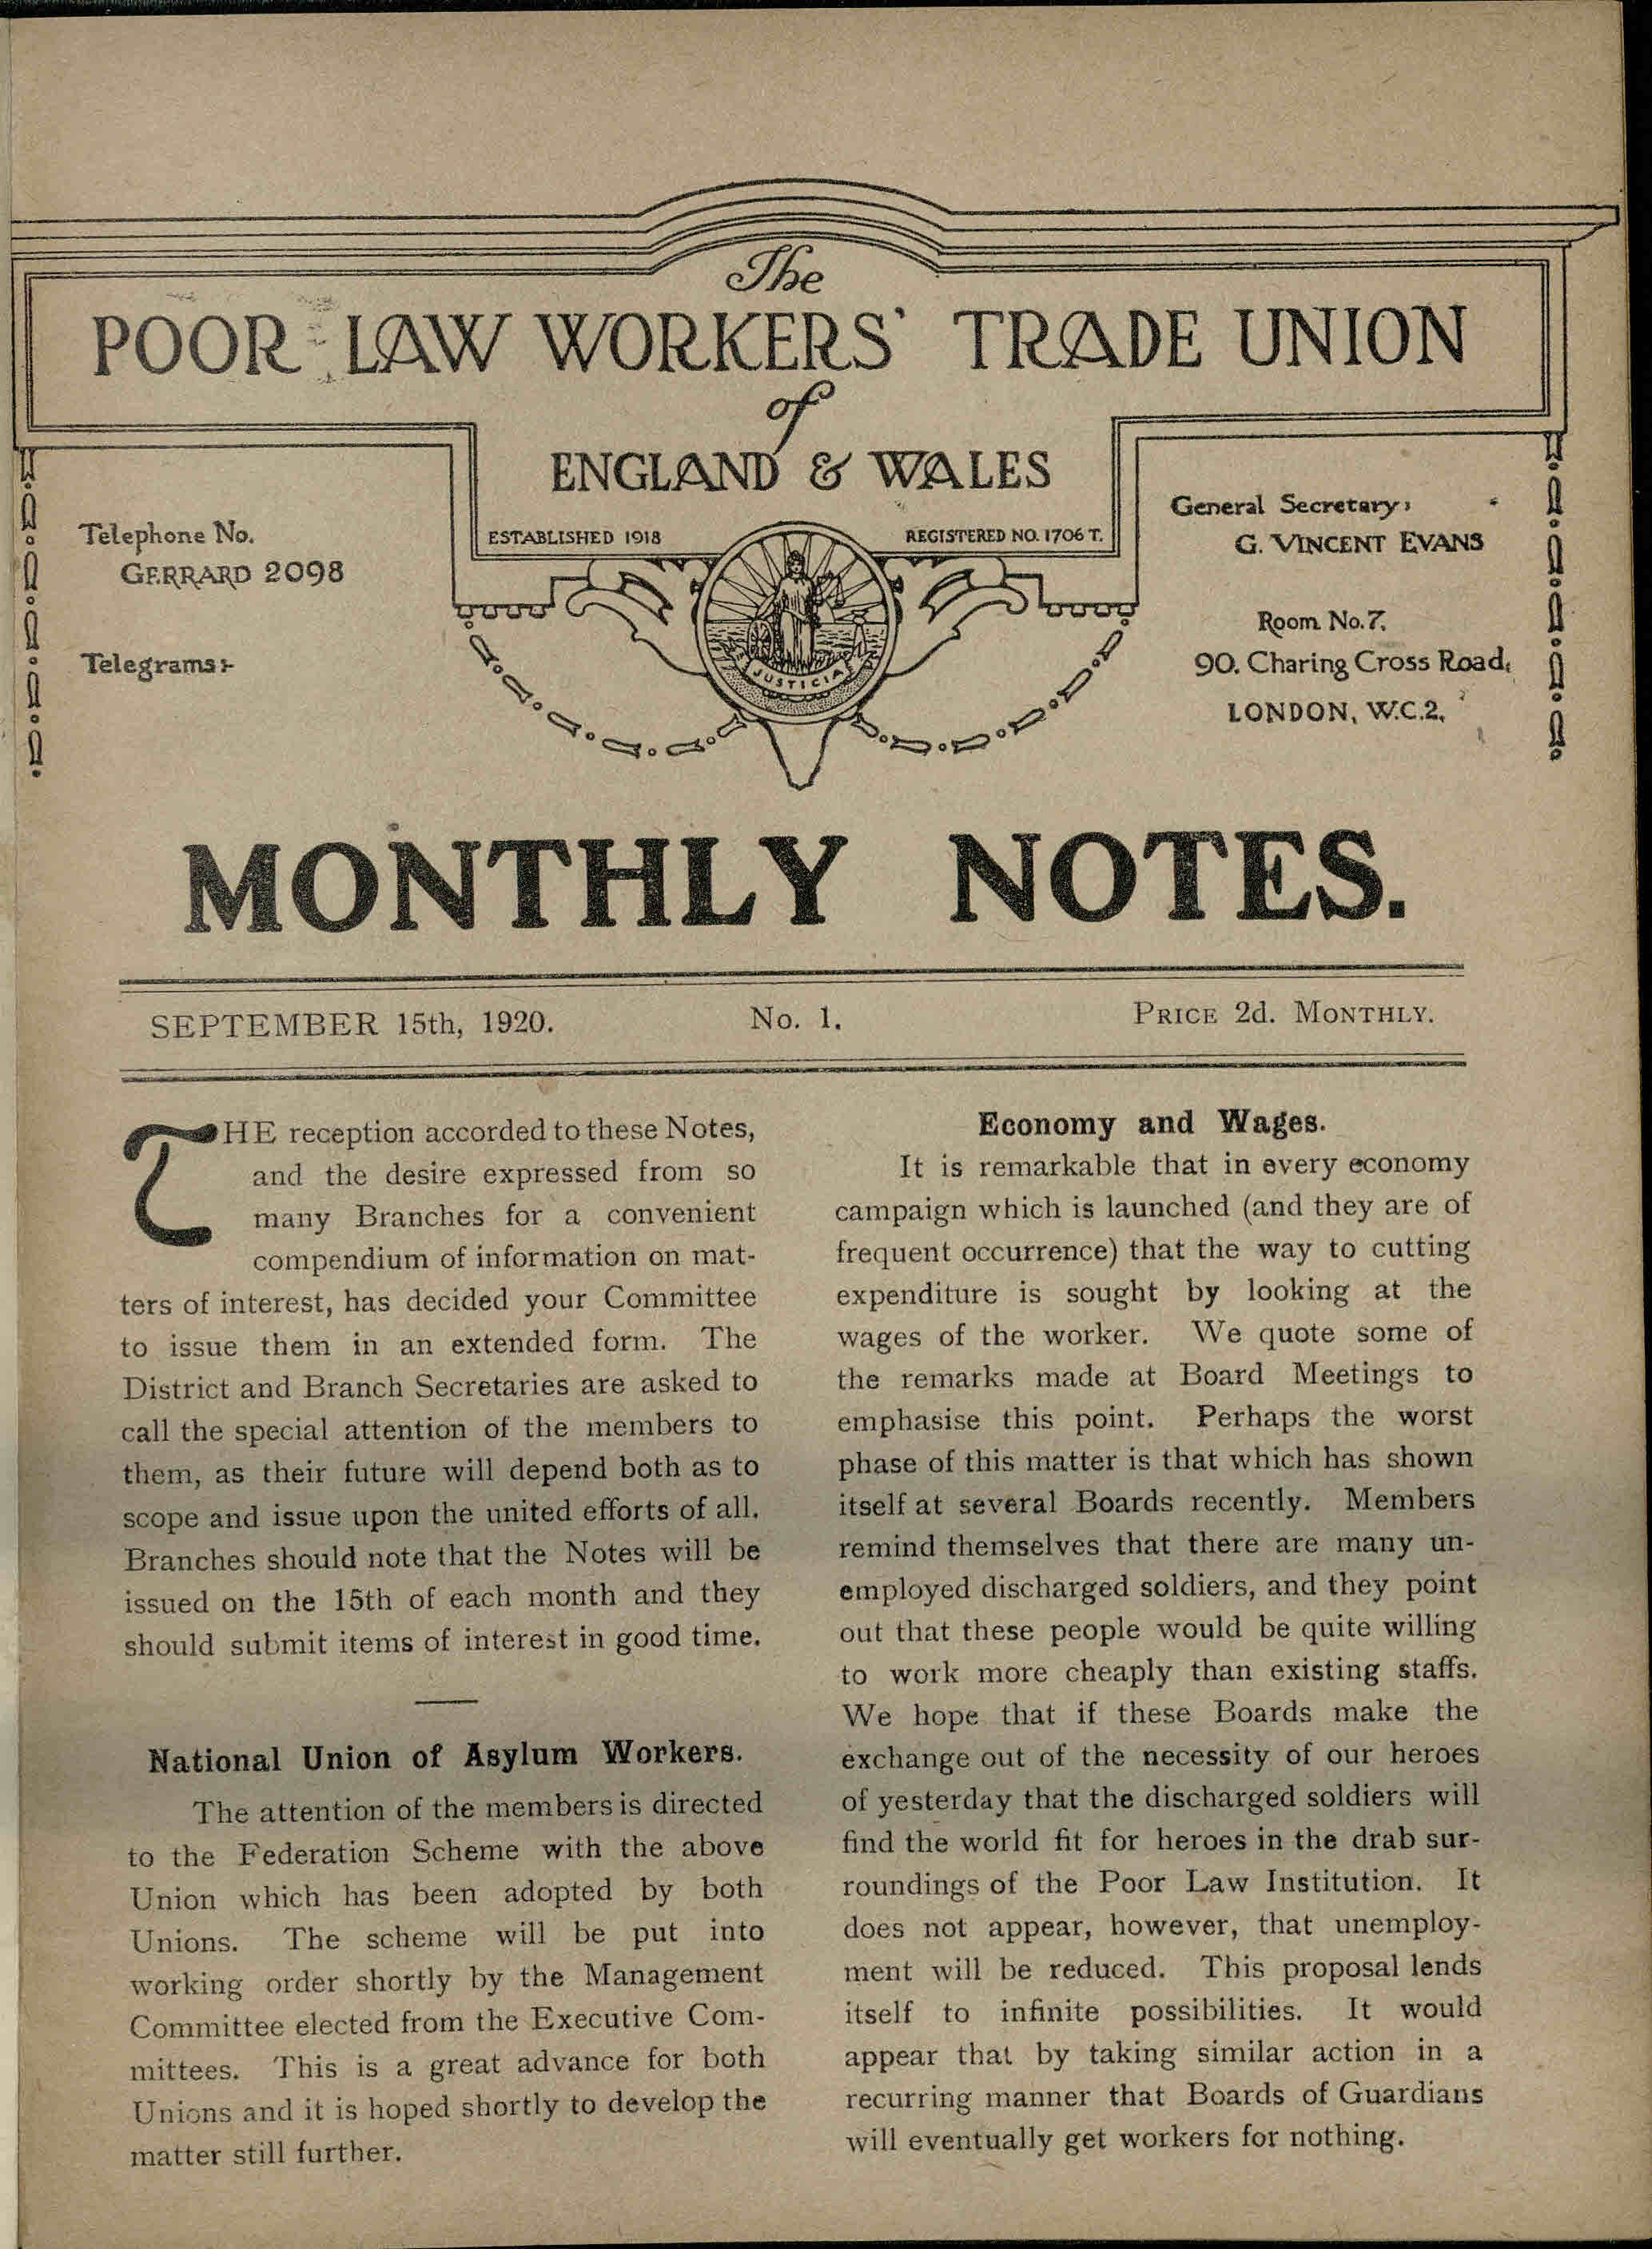 Front page of the first Monthly Notes